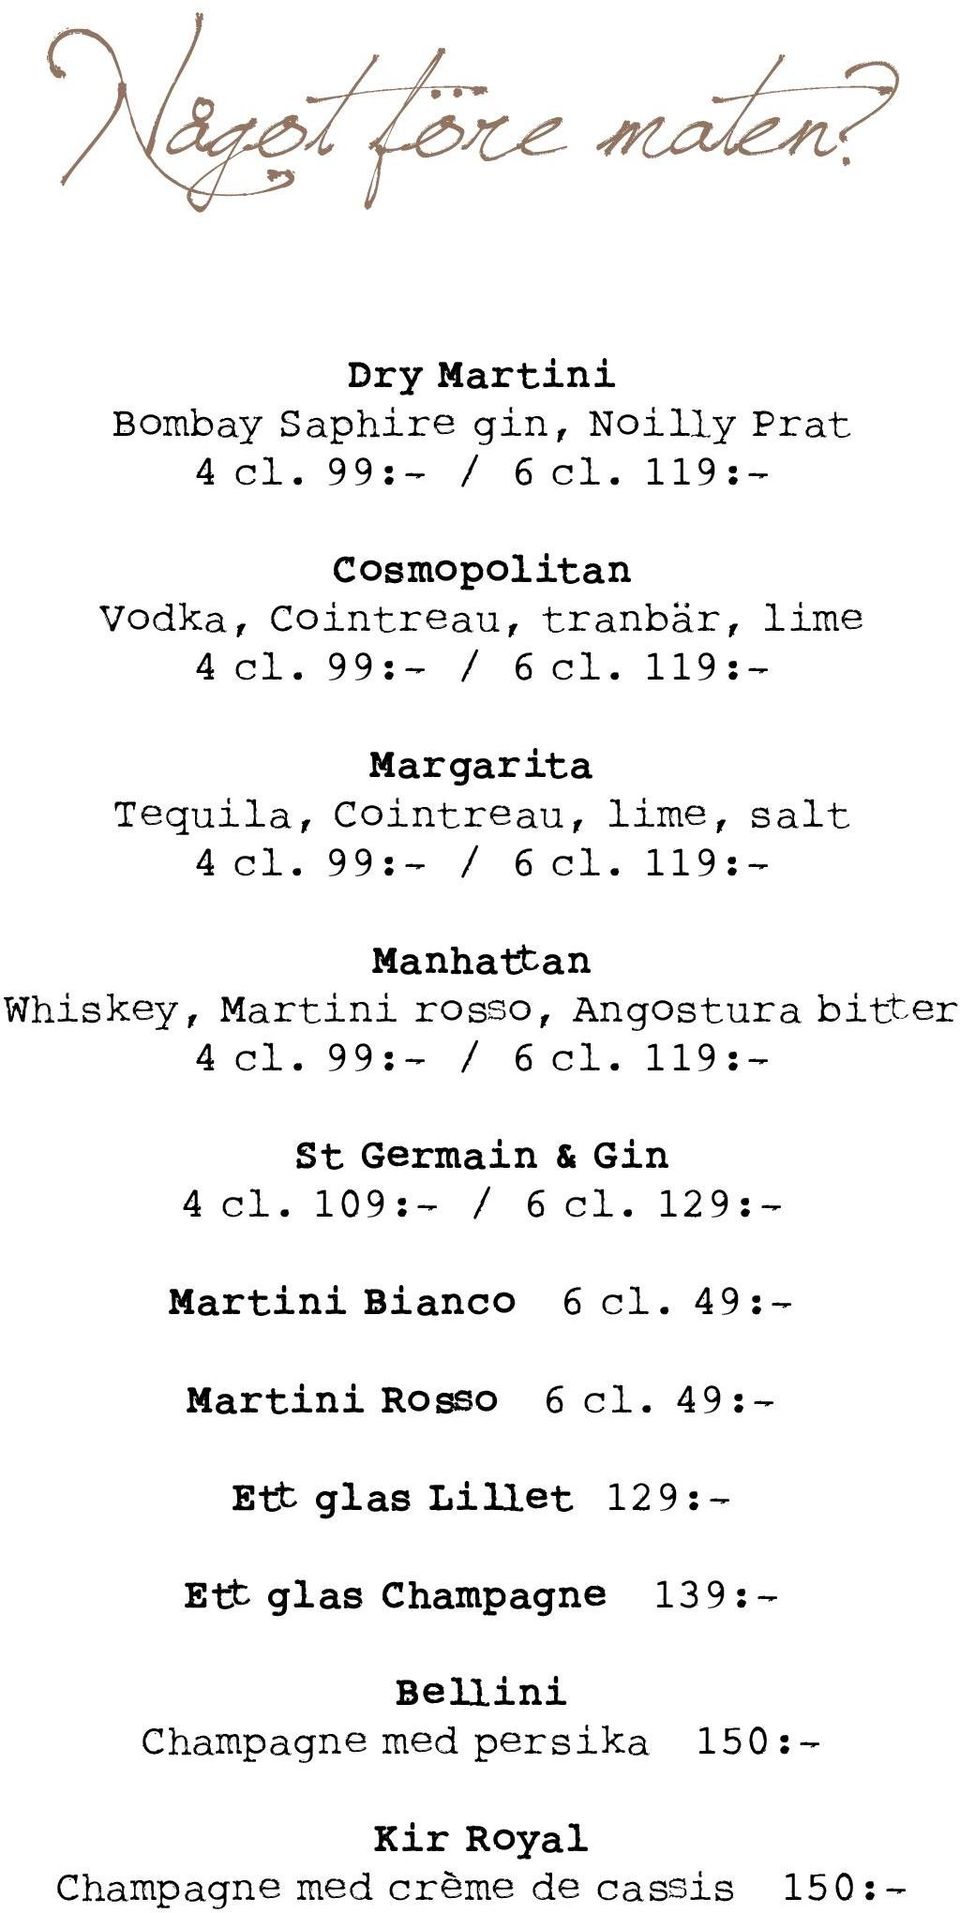 99:- / 6 cl. 119:- Manhattan Whiskey, Martini rosso, Angostura bitter 4 cl. 99:- / 6 cl. 119:- St Germain & Gin 4 cl. 109:- / 6 cl.